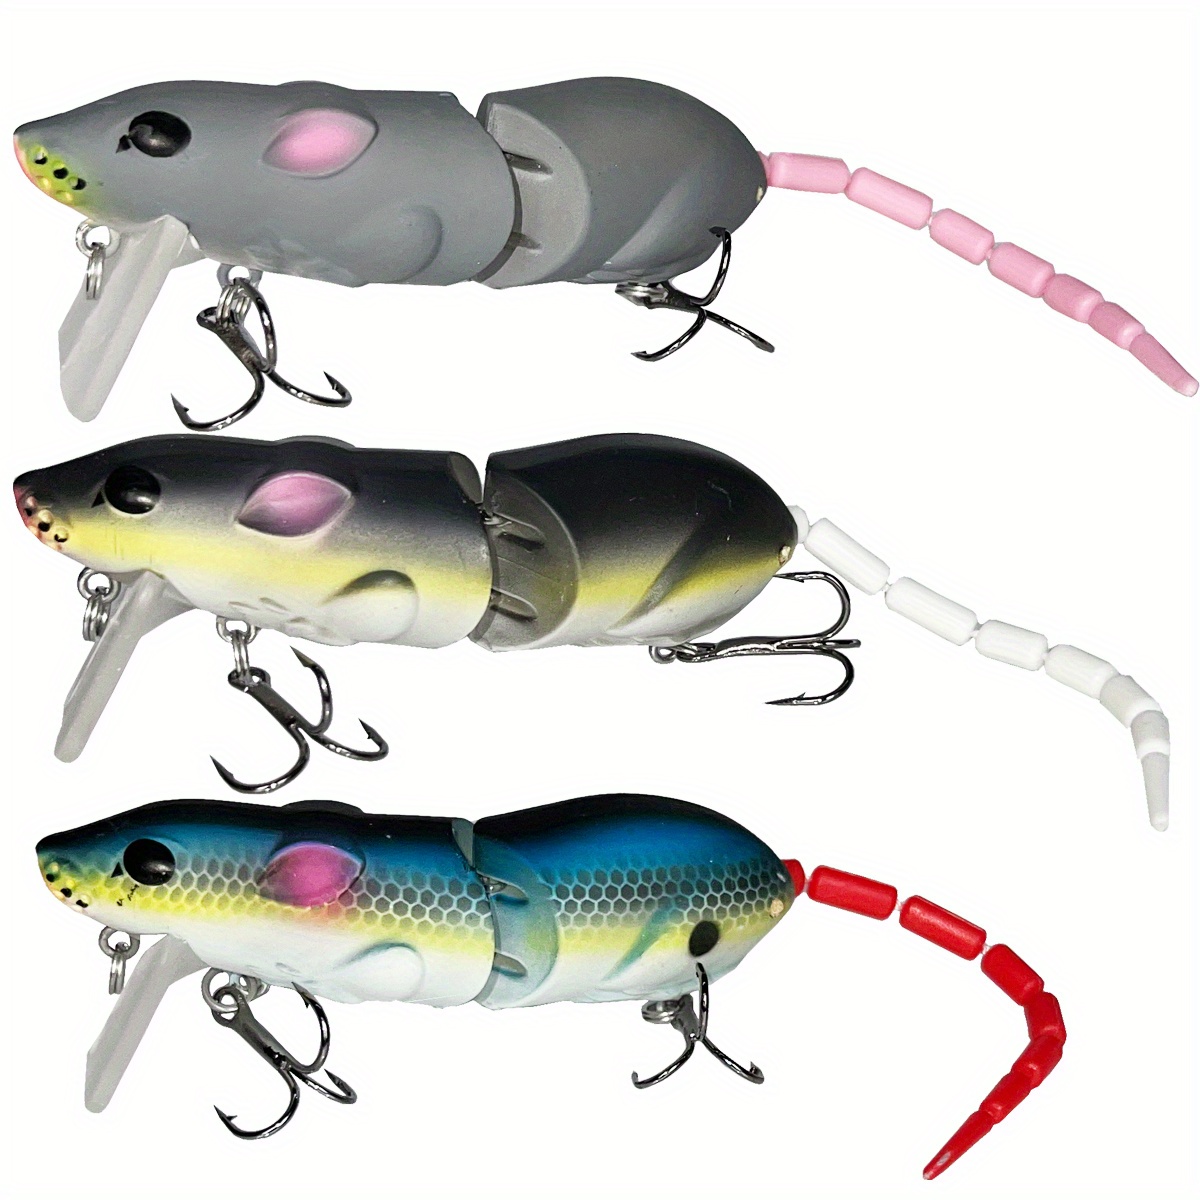 3pcs/set Effective Mouse Lure Swimbait with Hook for Catching Pike and  Other Fish - Perfect Fishing Tackle for Anglers